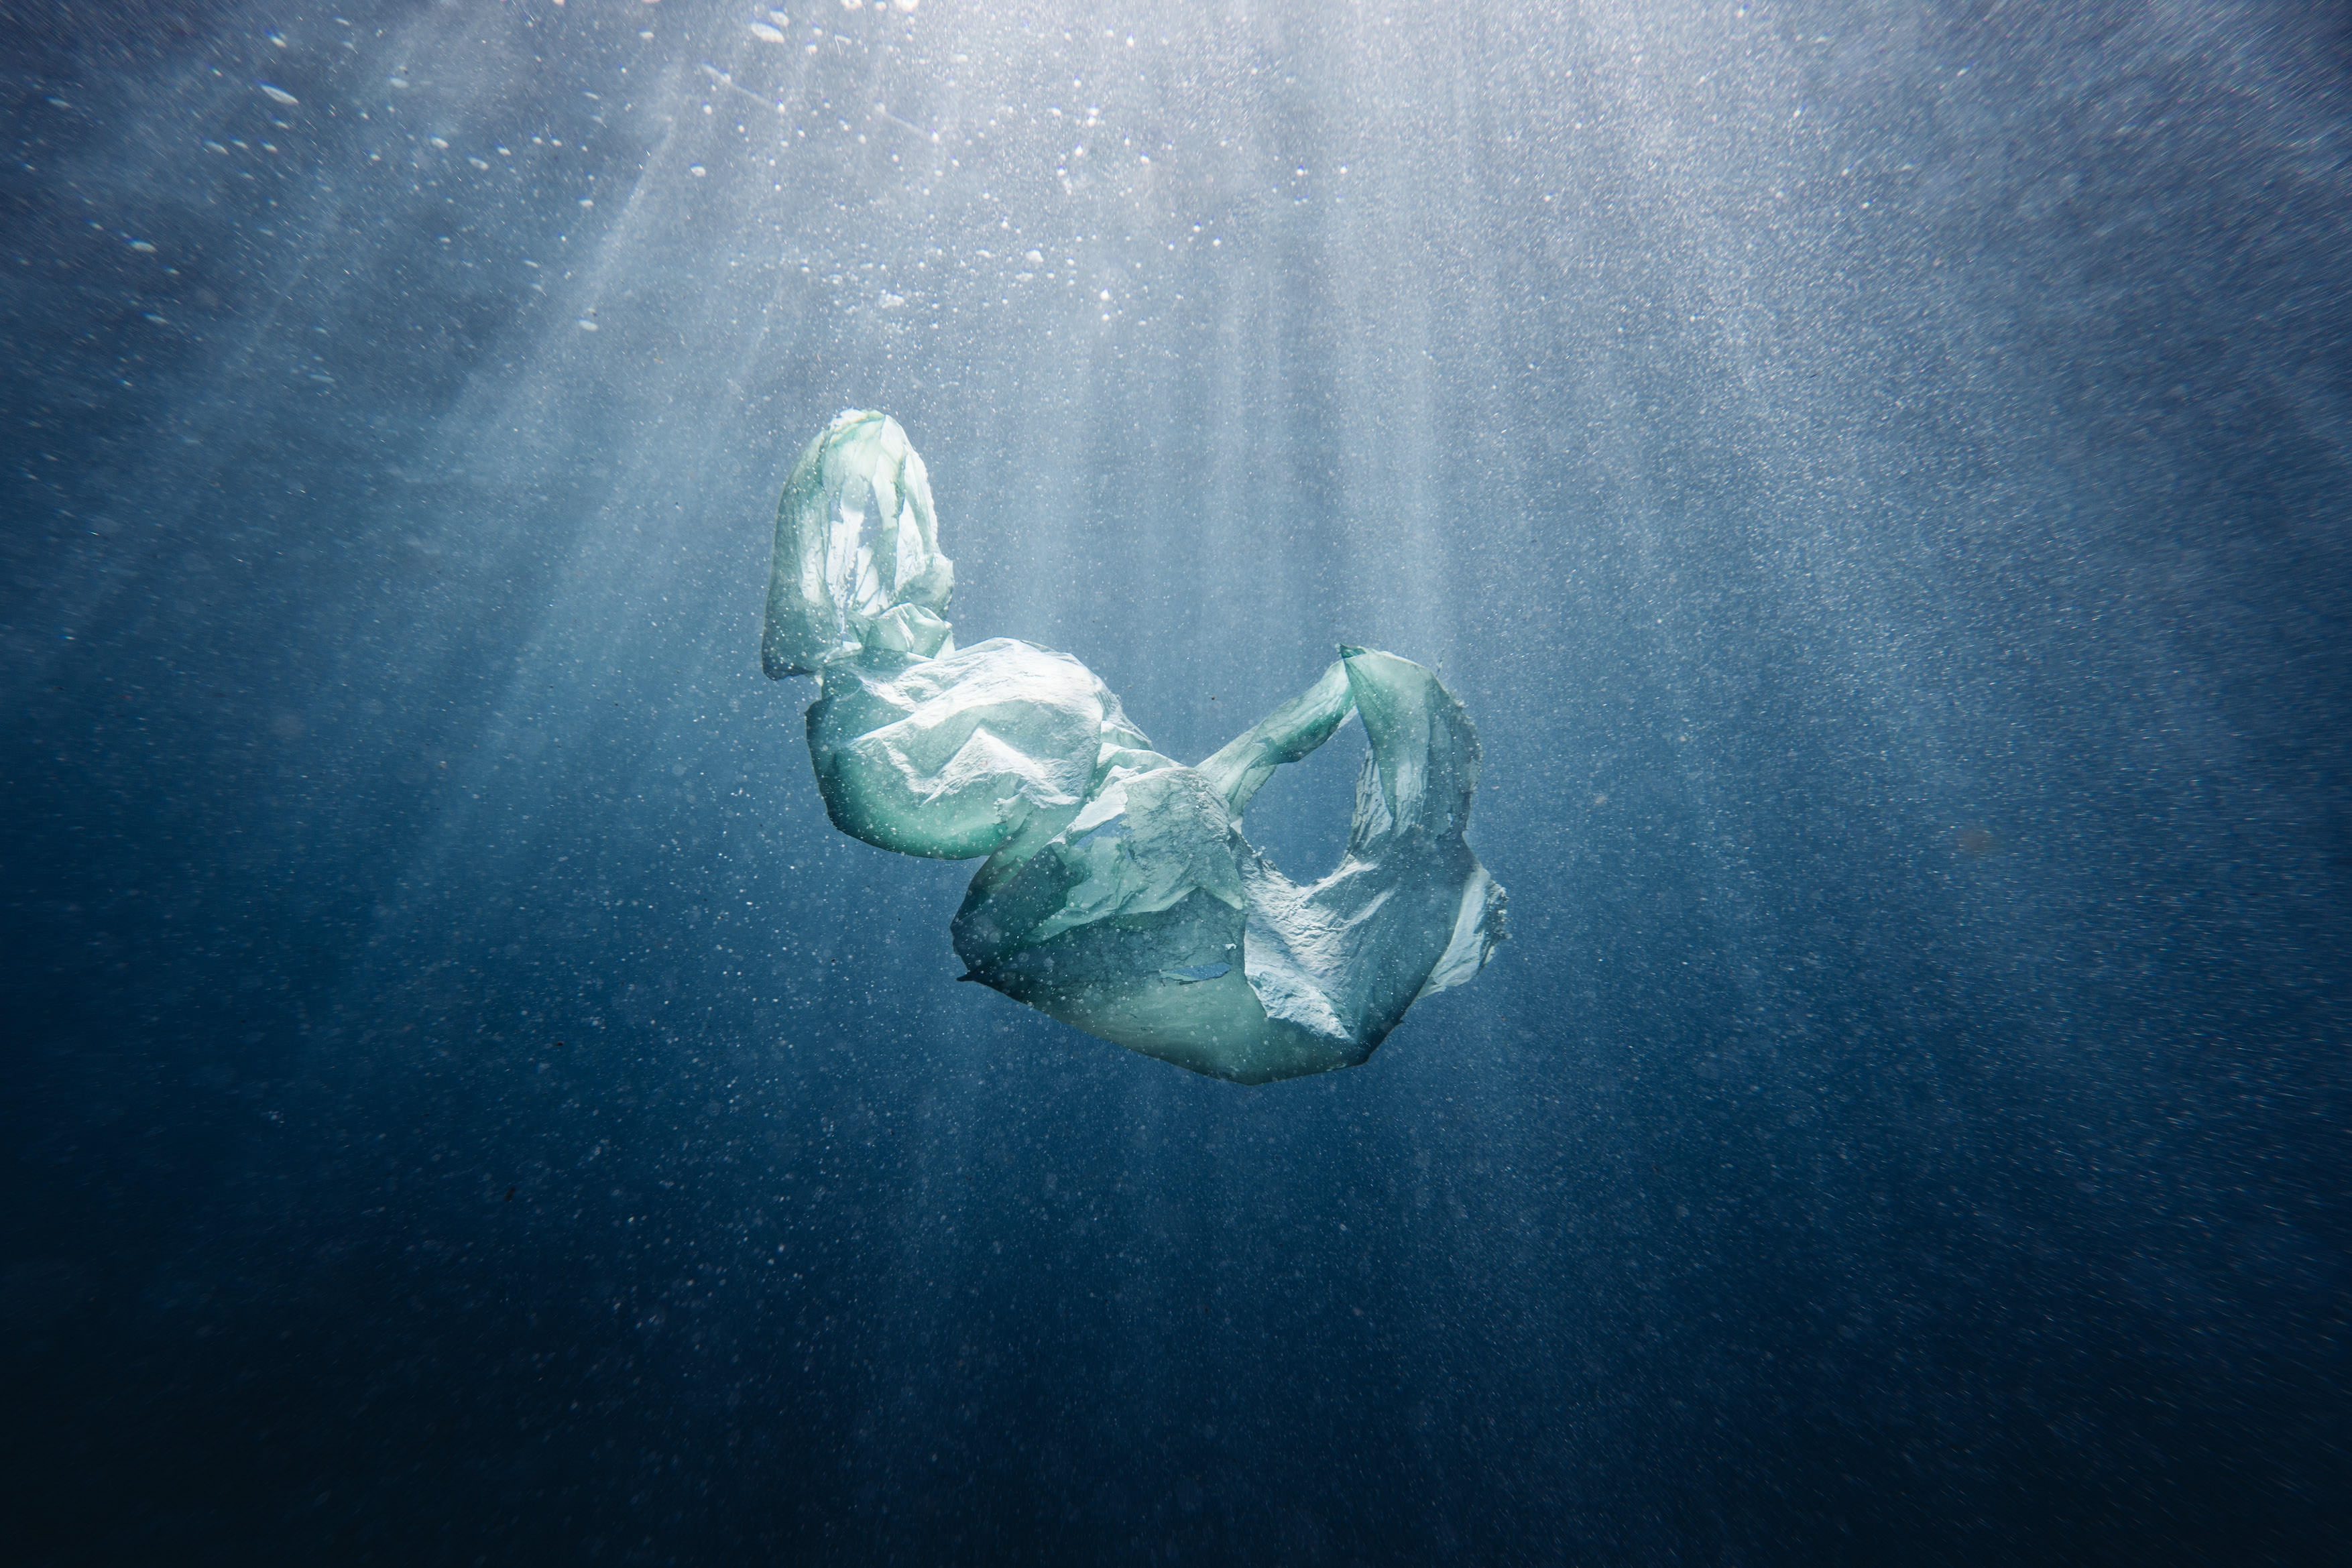 A plastic bag floats in water.